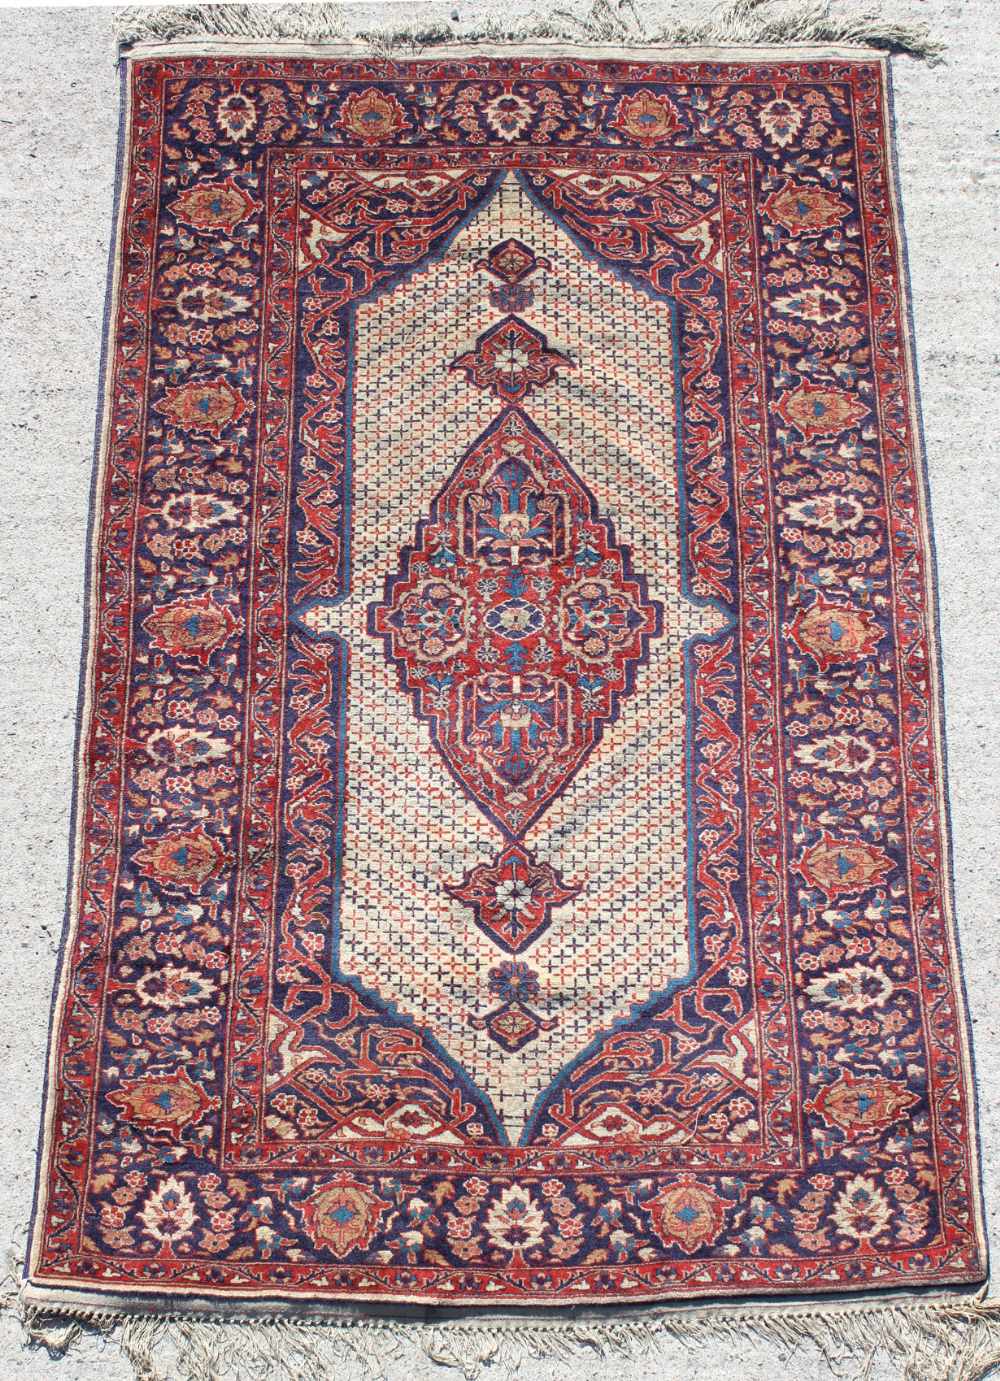 Property of a deceased estate - an early 20th century Tabriz rug, with large ivory medallion on navy